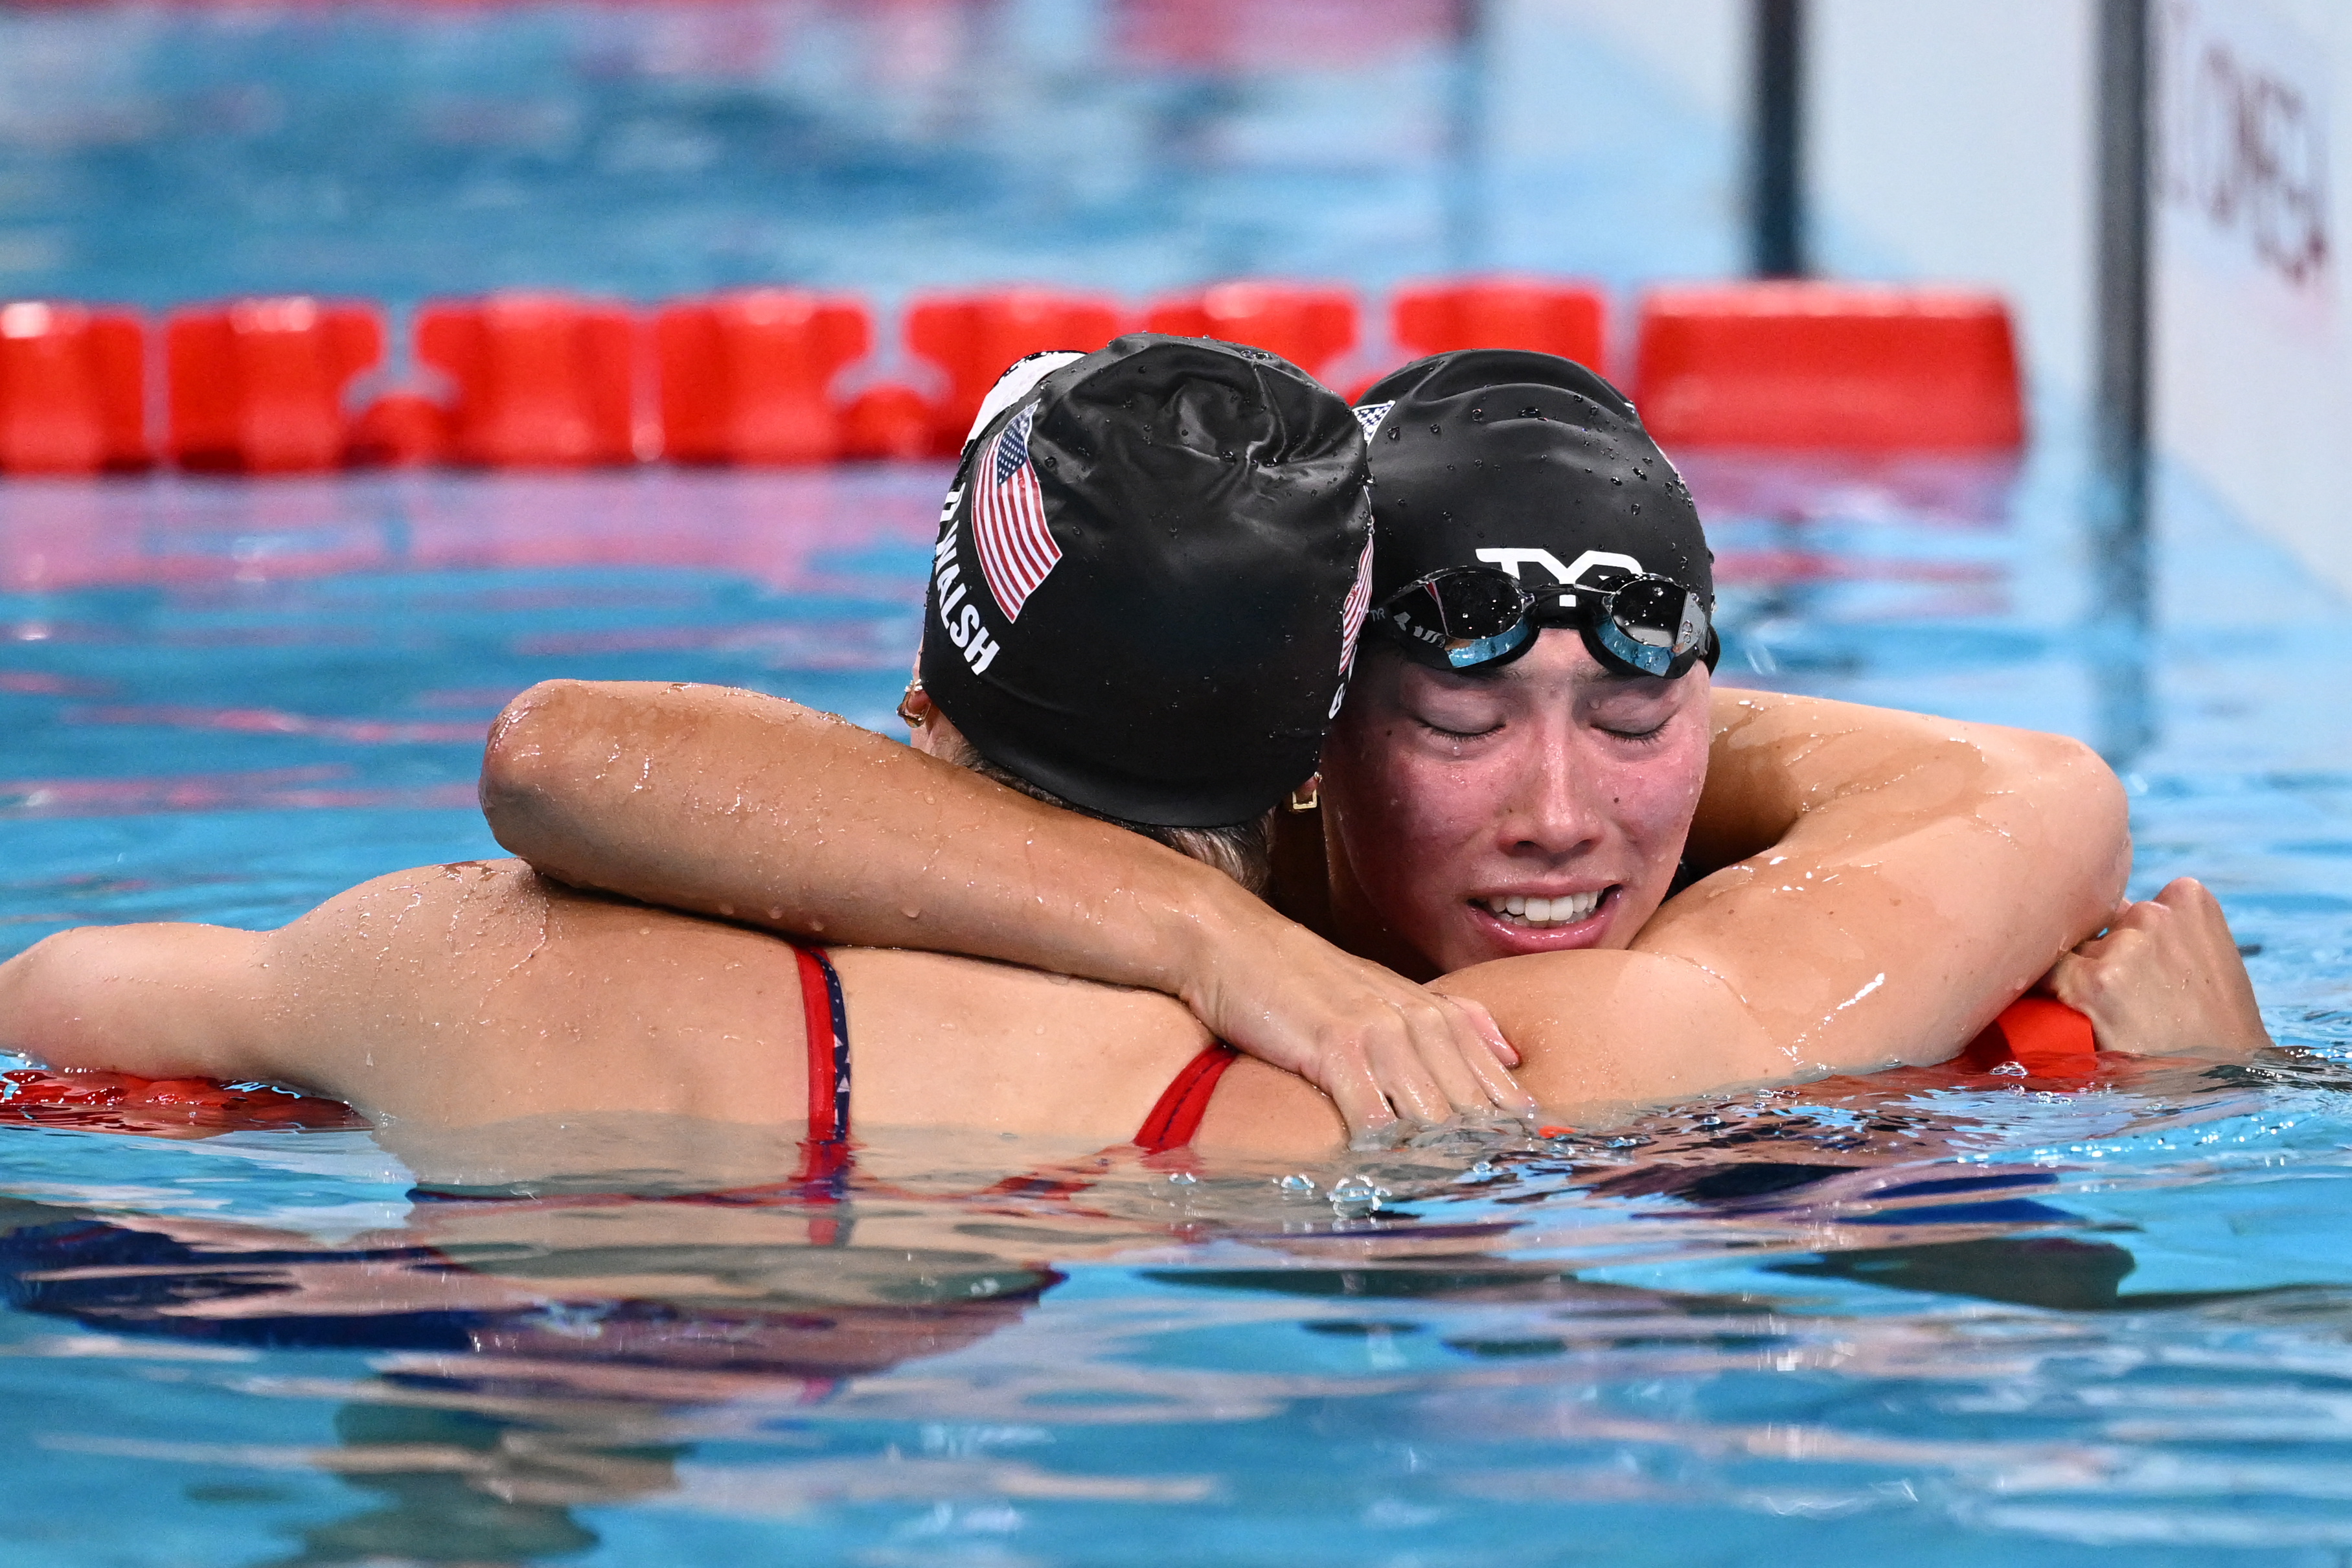 WATCH: Americans Torri Huske and Gretchen Walsh take gold and silver in women's 100m butterfly